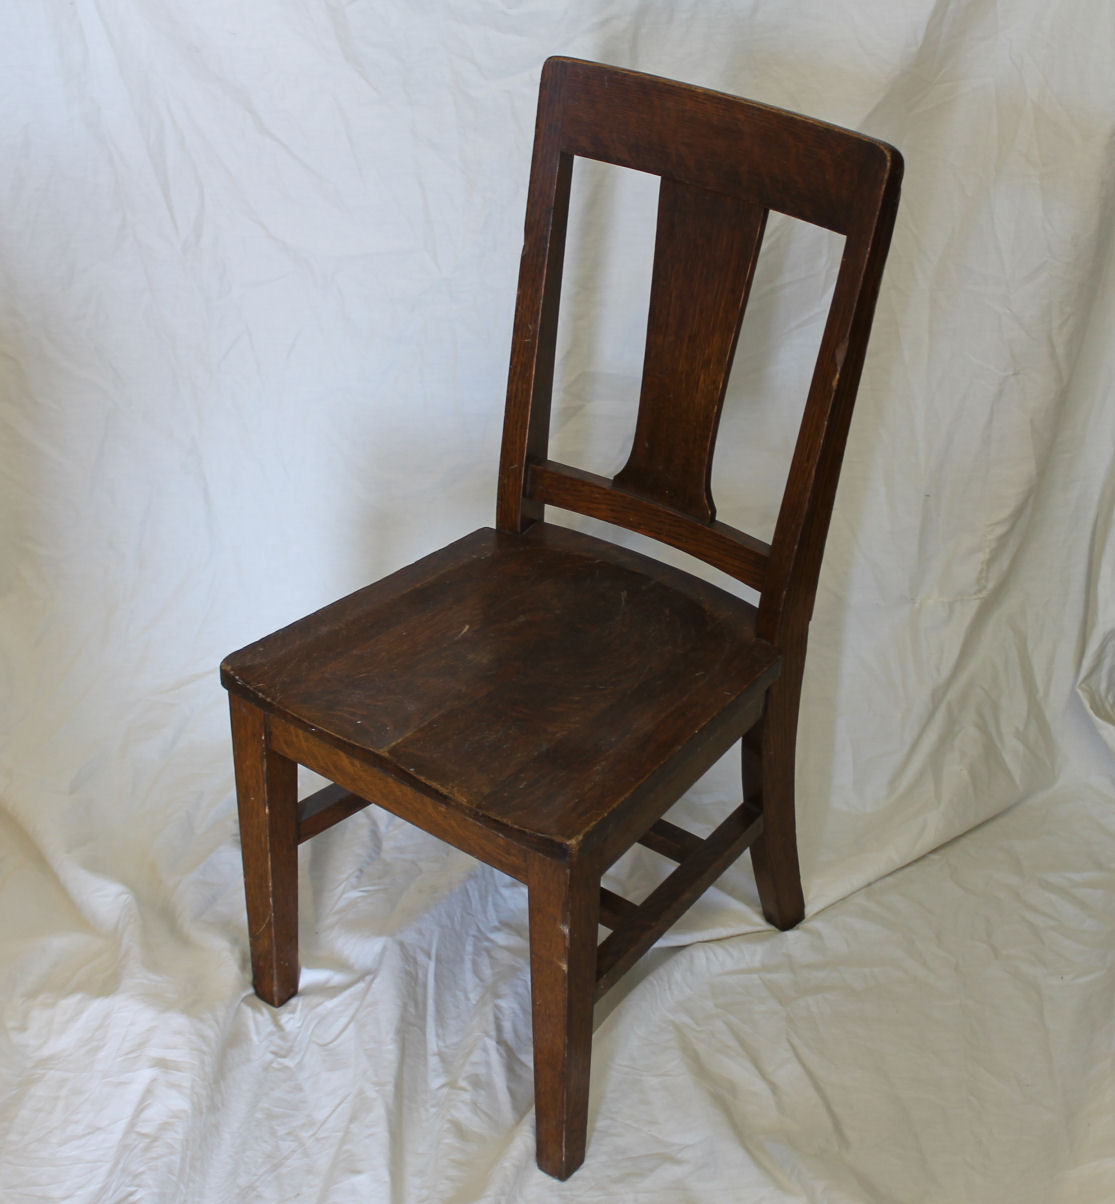 bargain john's antiques antique oak youth chair - made